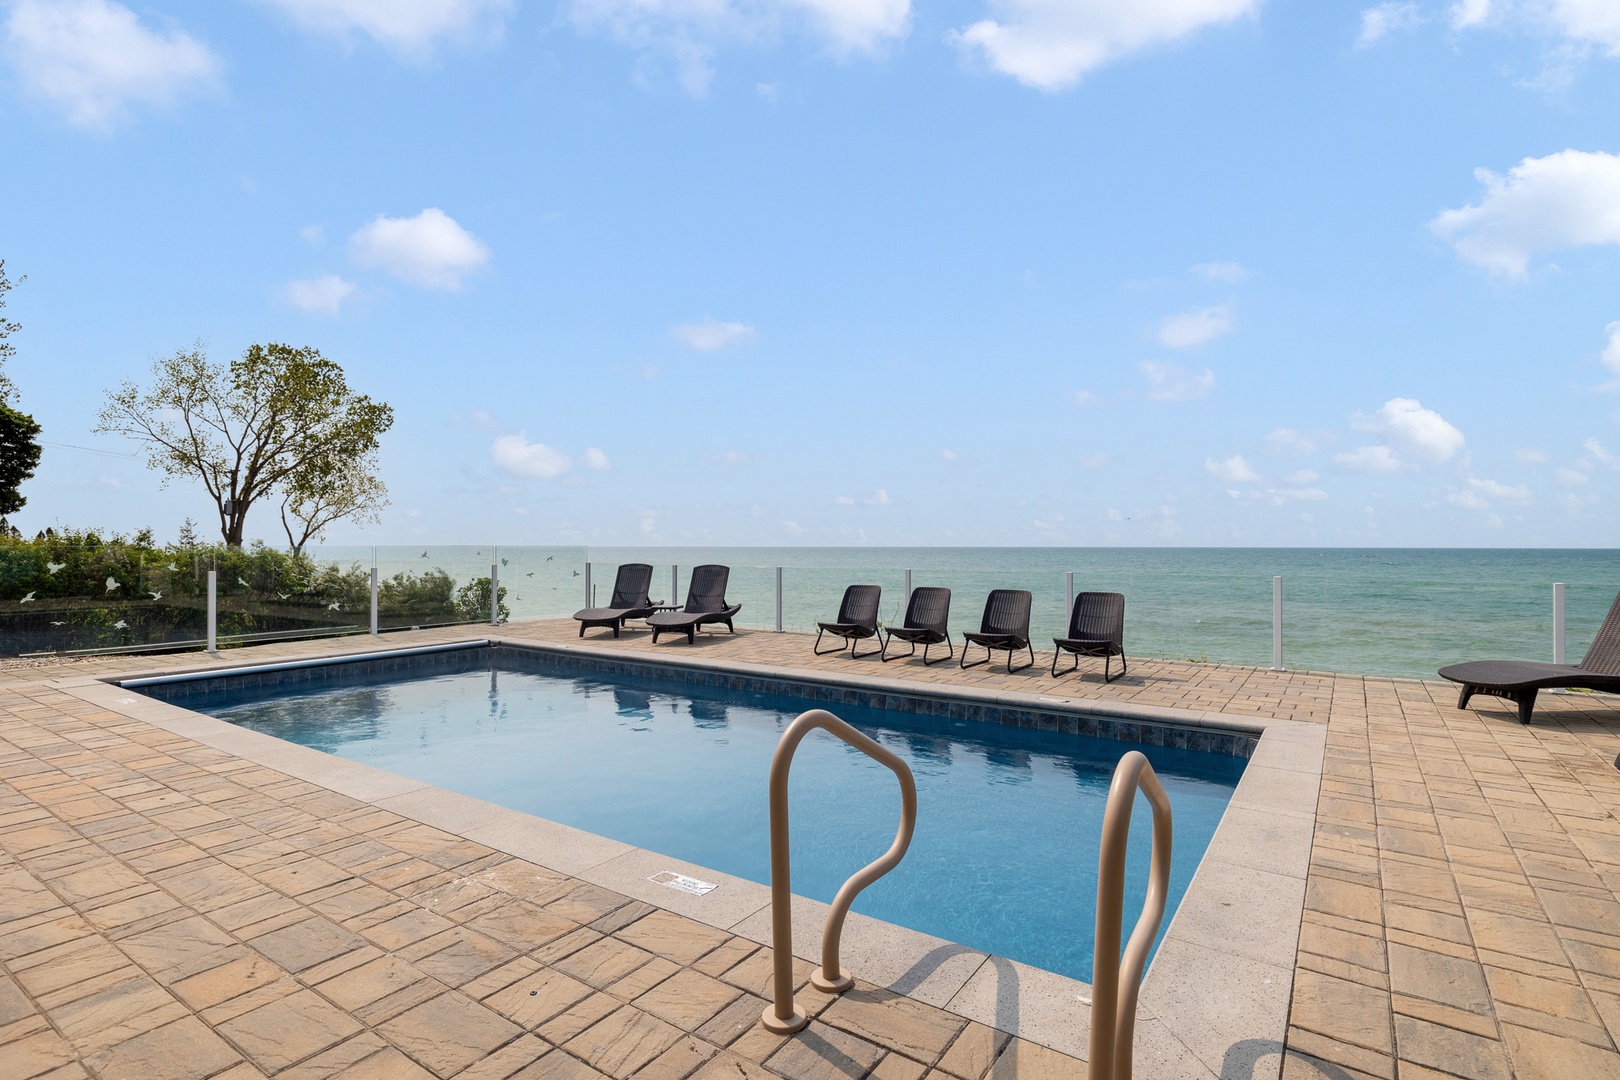 The luxurious pool and amenities make for the ultimate lakefront vacation experience.